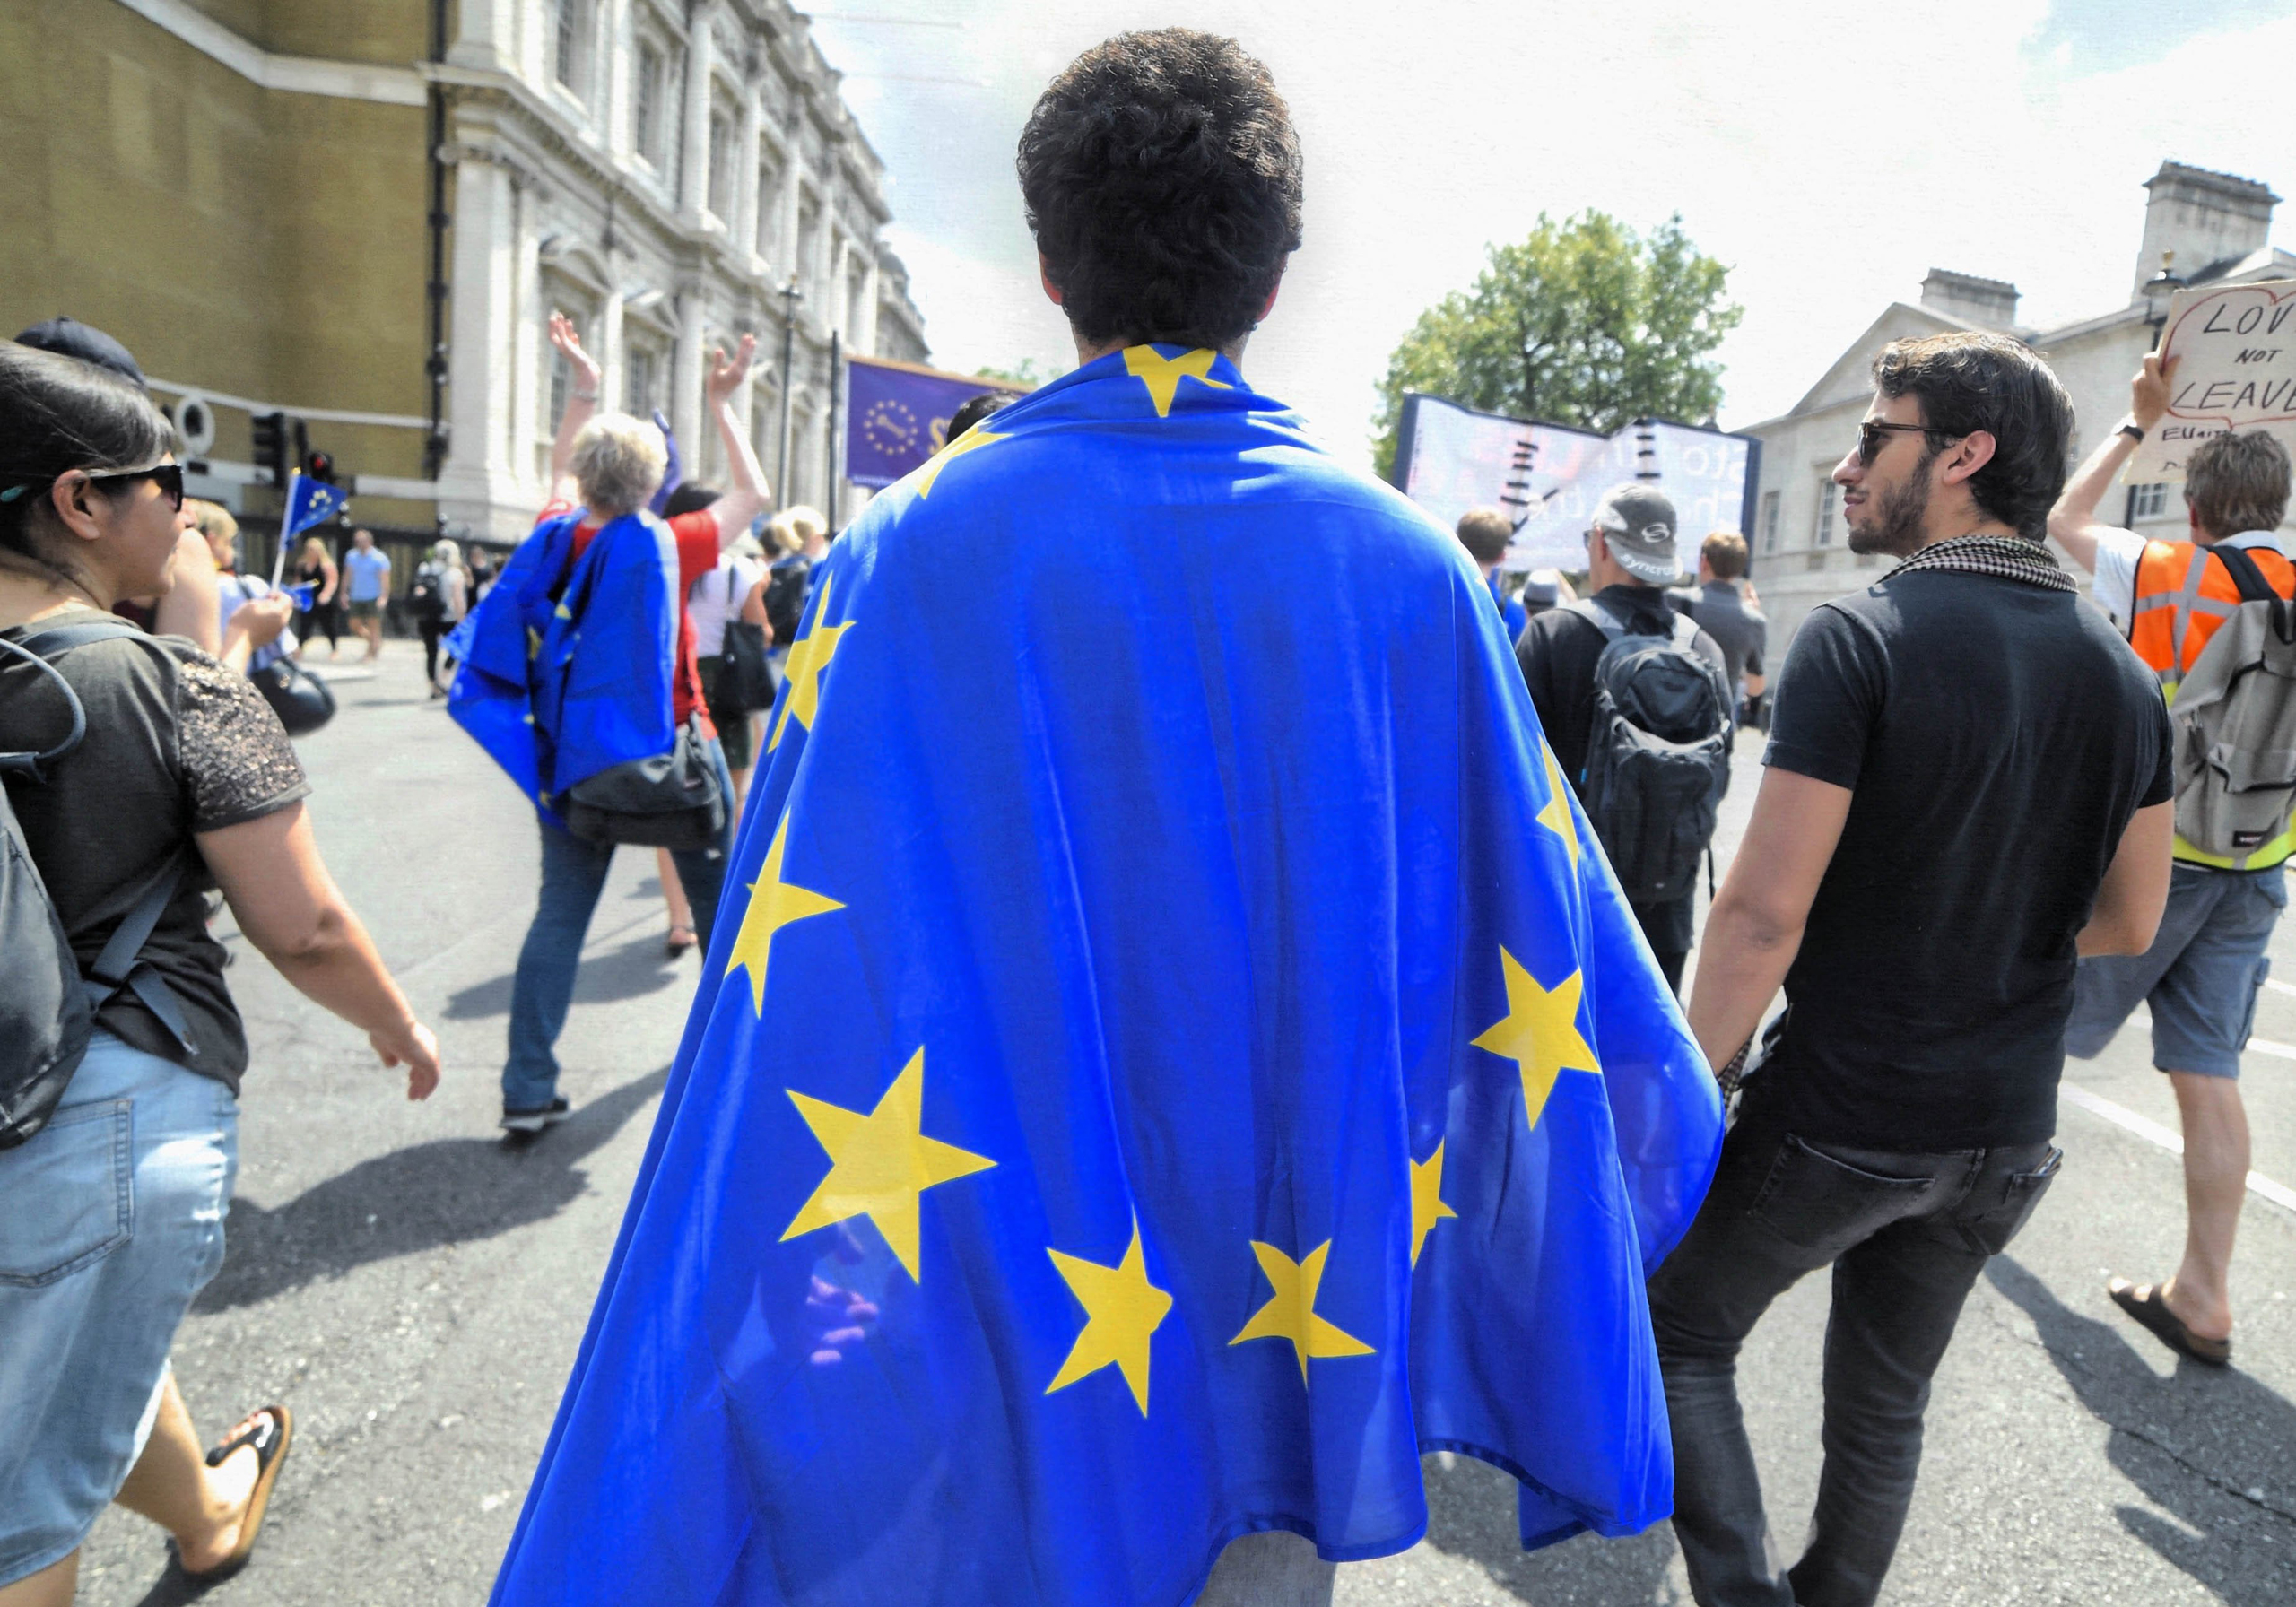 Hundreds of Pro-European campaigners marched to 10 Downing Street in London on  July 23, 2016. (Gail Orenstein—NurPhoto/Sipa USA)